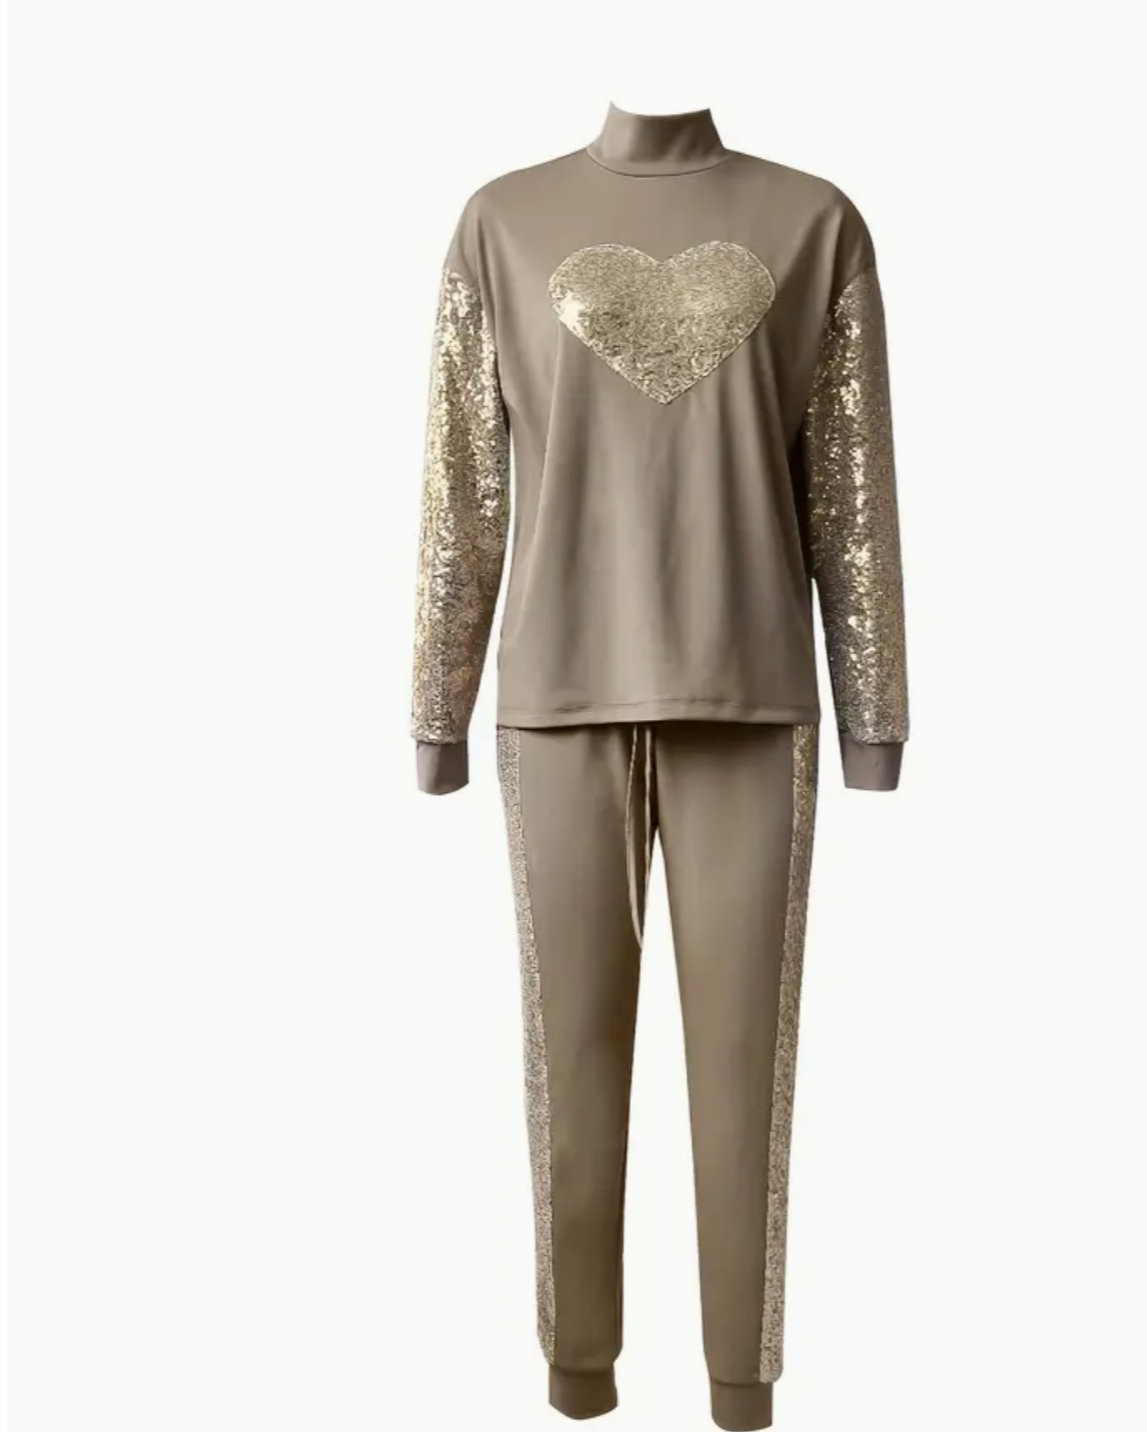 Sparkling Hearts: Casual Sequined Two-Piece Set with Mock Neck Top & Drawstring Pants - Effortless Elegance in Women's Clothing!